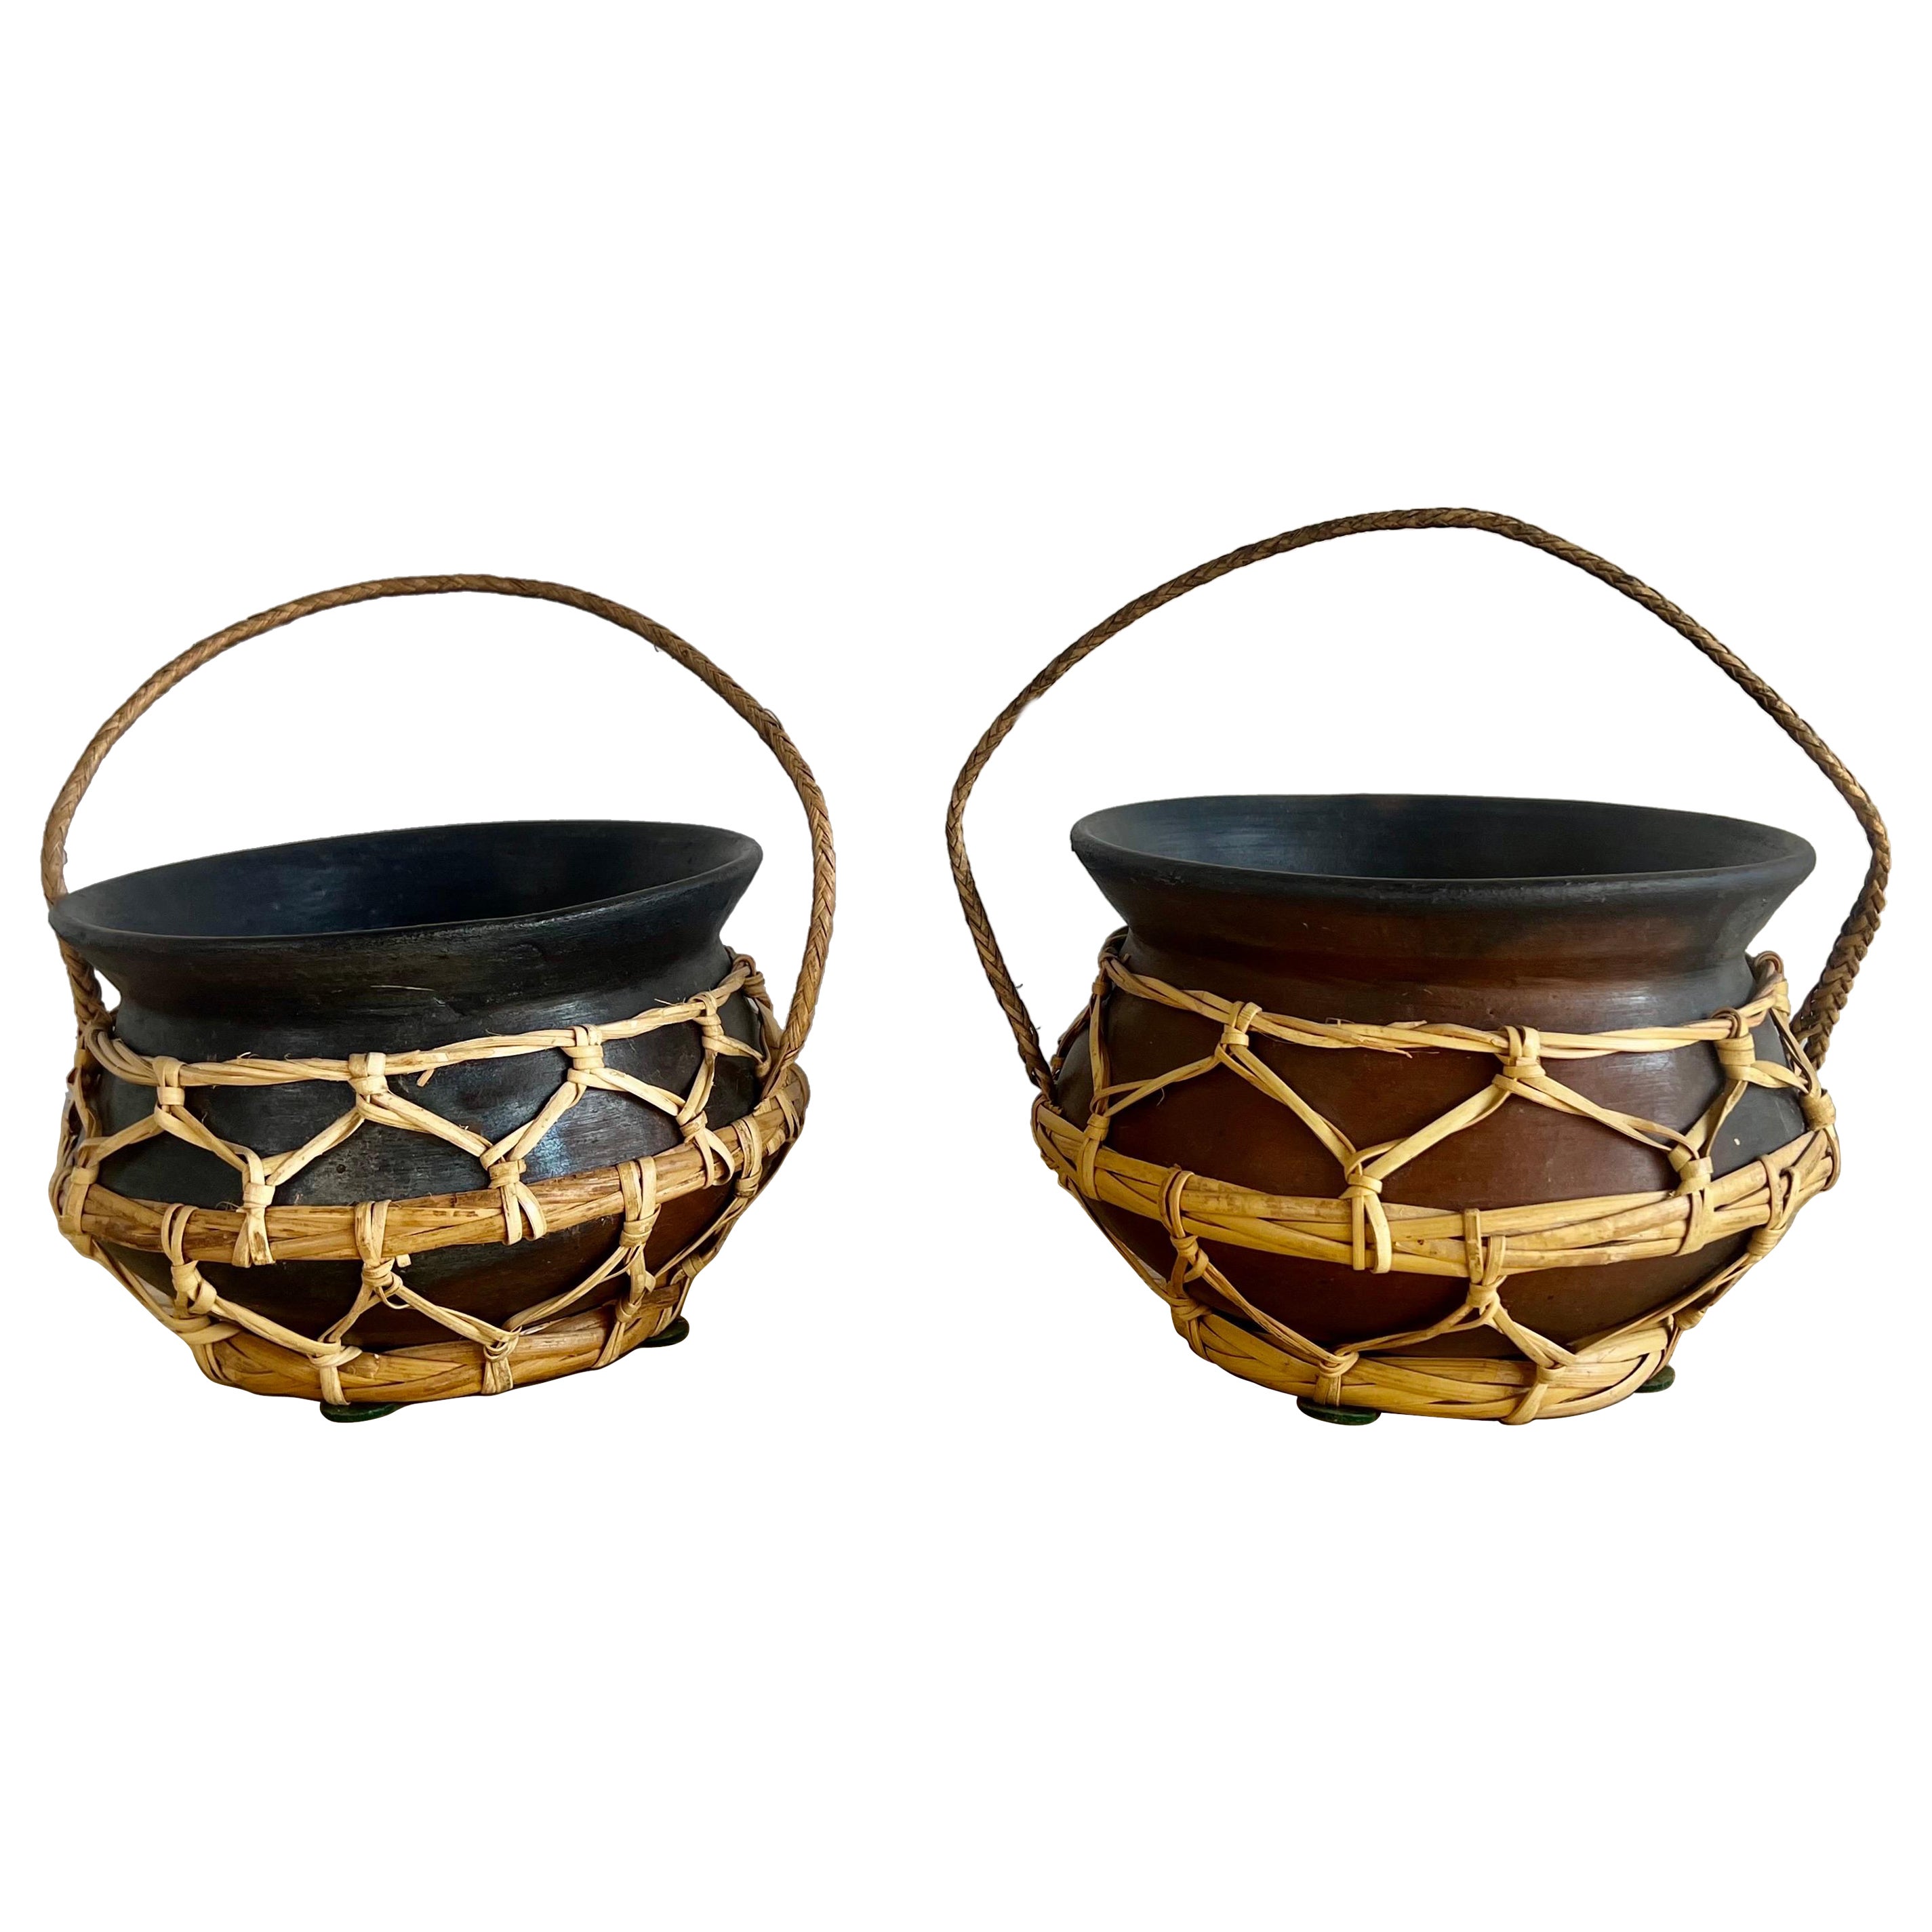 Pair of Antique Nigerian Nupe Clay Pots w/ Rattan Handles